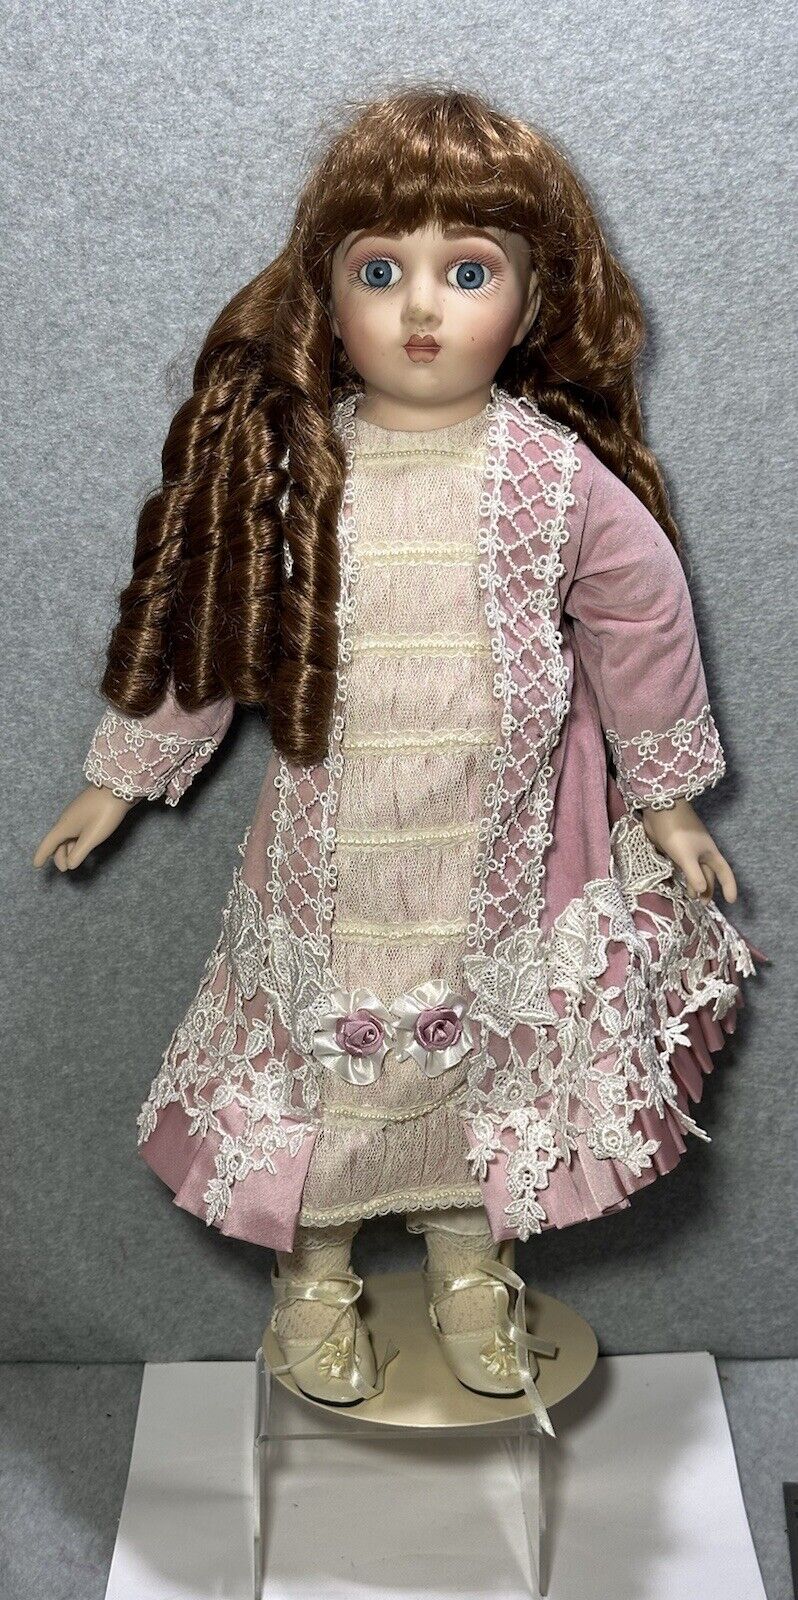 Doll Franklin Heirloom Porcelain Victorian Doll APPR 21” With Flaw